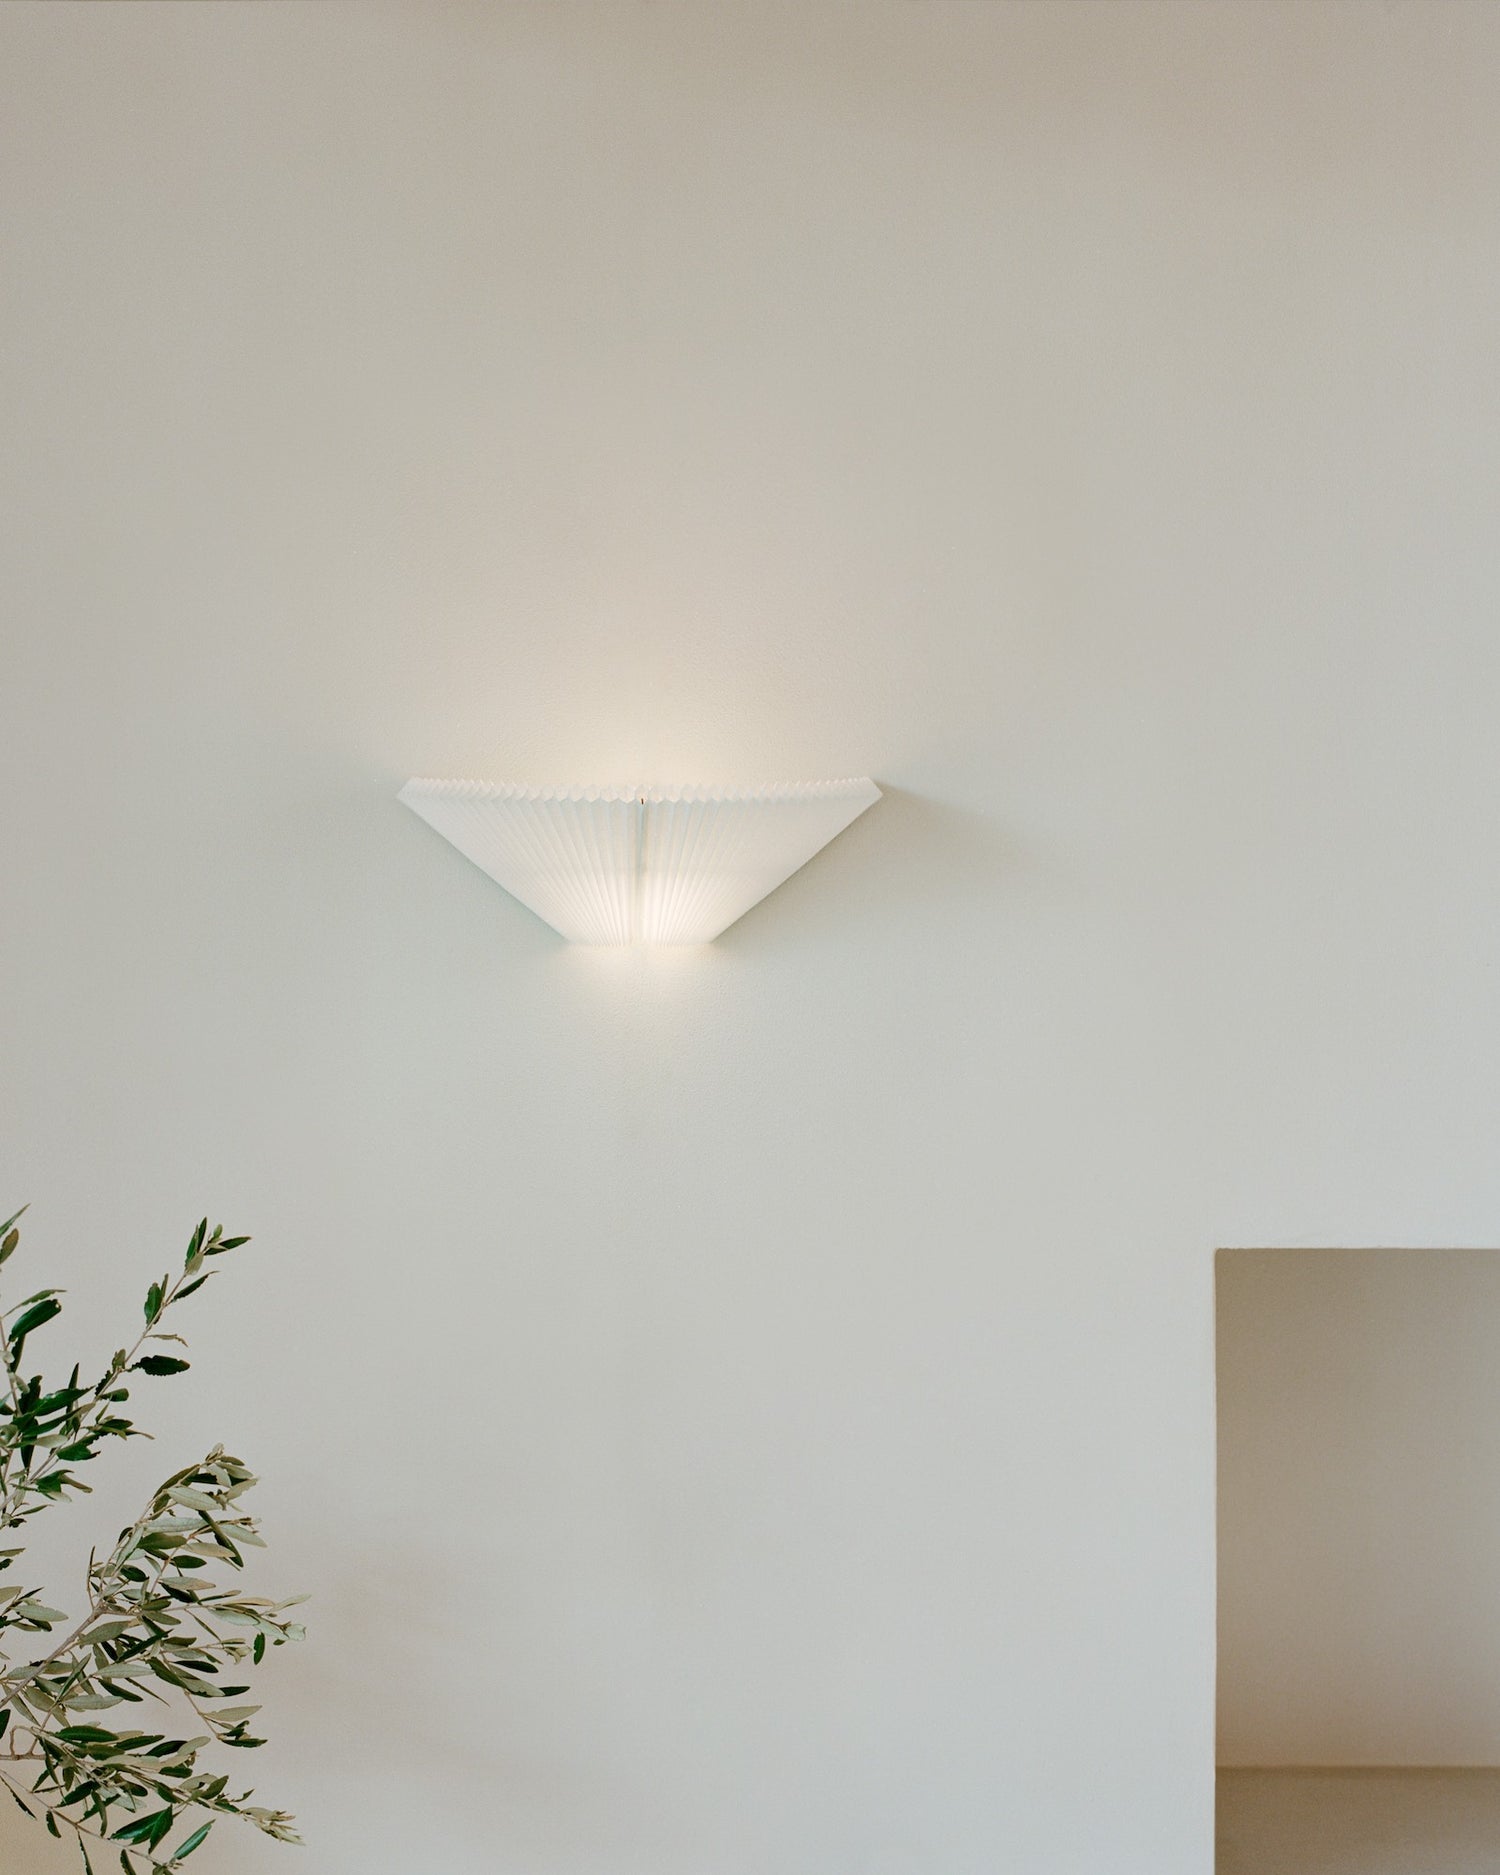 Nebra Wall Lamp by New Works, on ceiling with shade turned down, front view